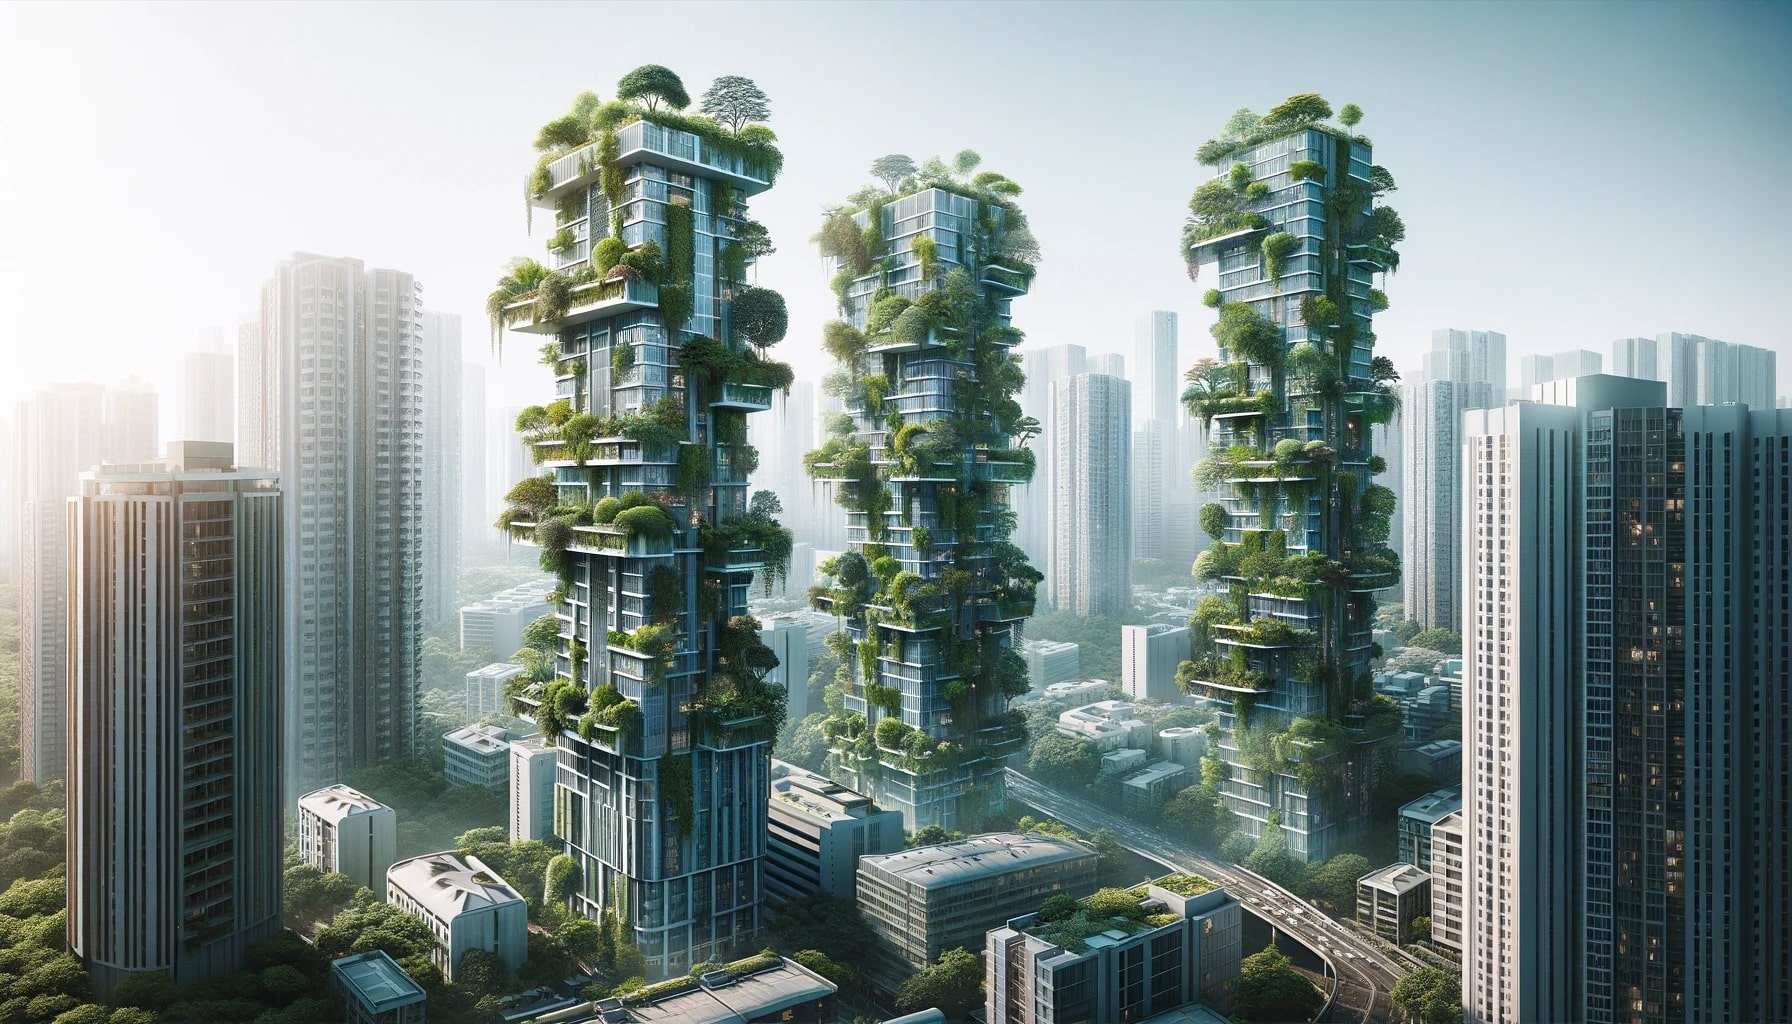 The scene shows a cityscape with skyscrapers, but unlike typical buildings, these are adorned with lush greenery on balconies and facades.